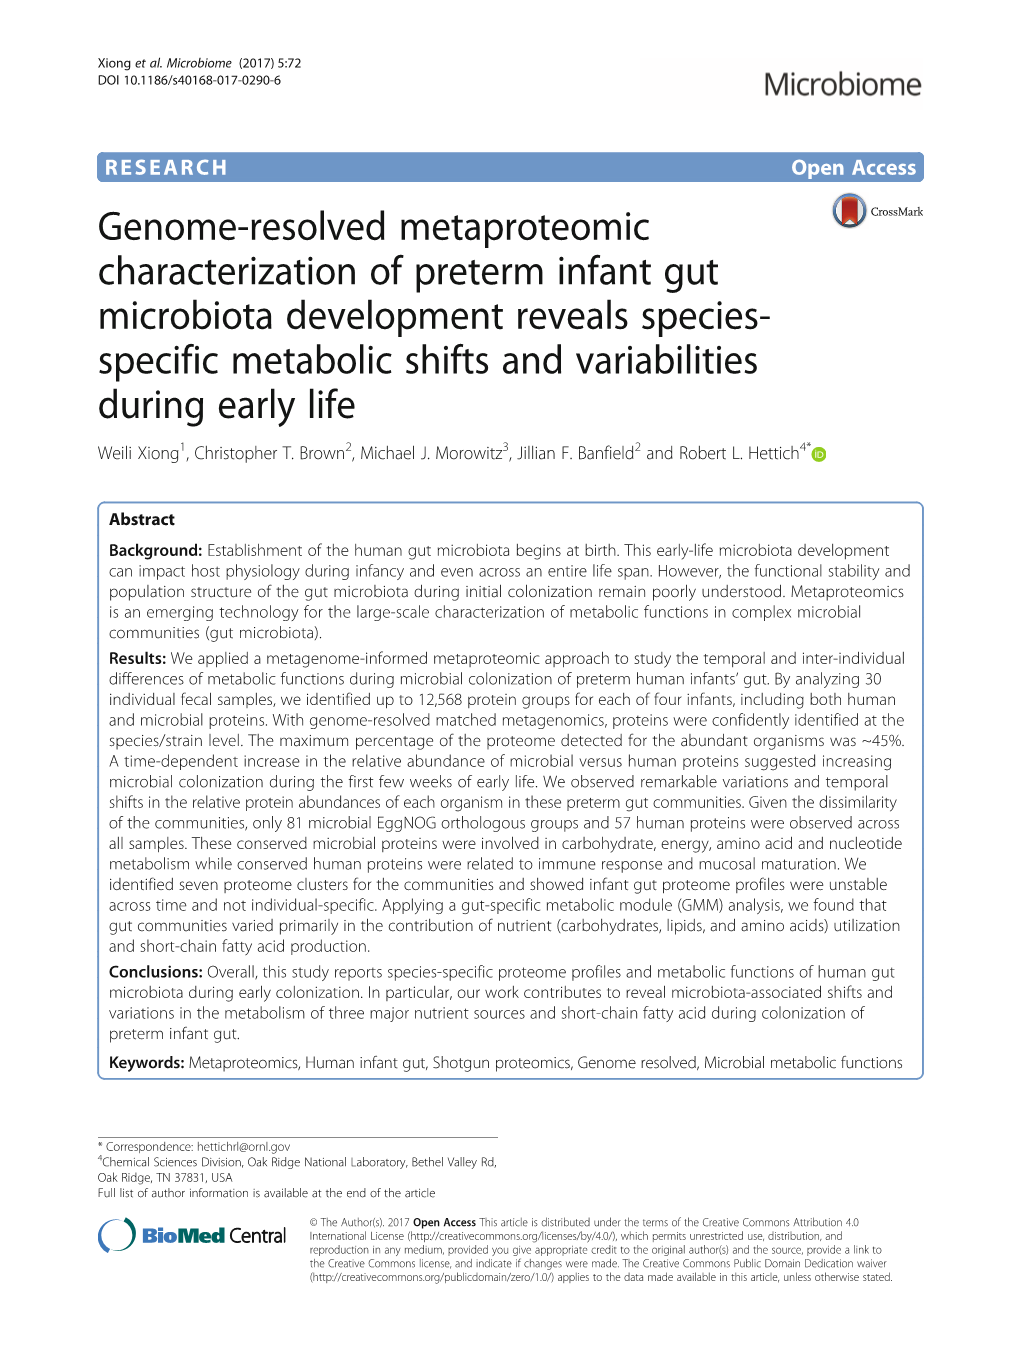 Genome-Resolved Metaproteomic Characterization of Preterm Infant Gut Microbiota Development Reveals Species-Specific Metabolic S